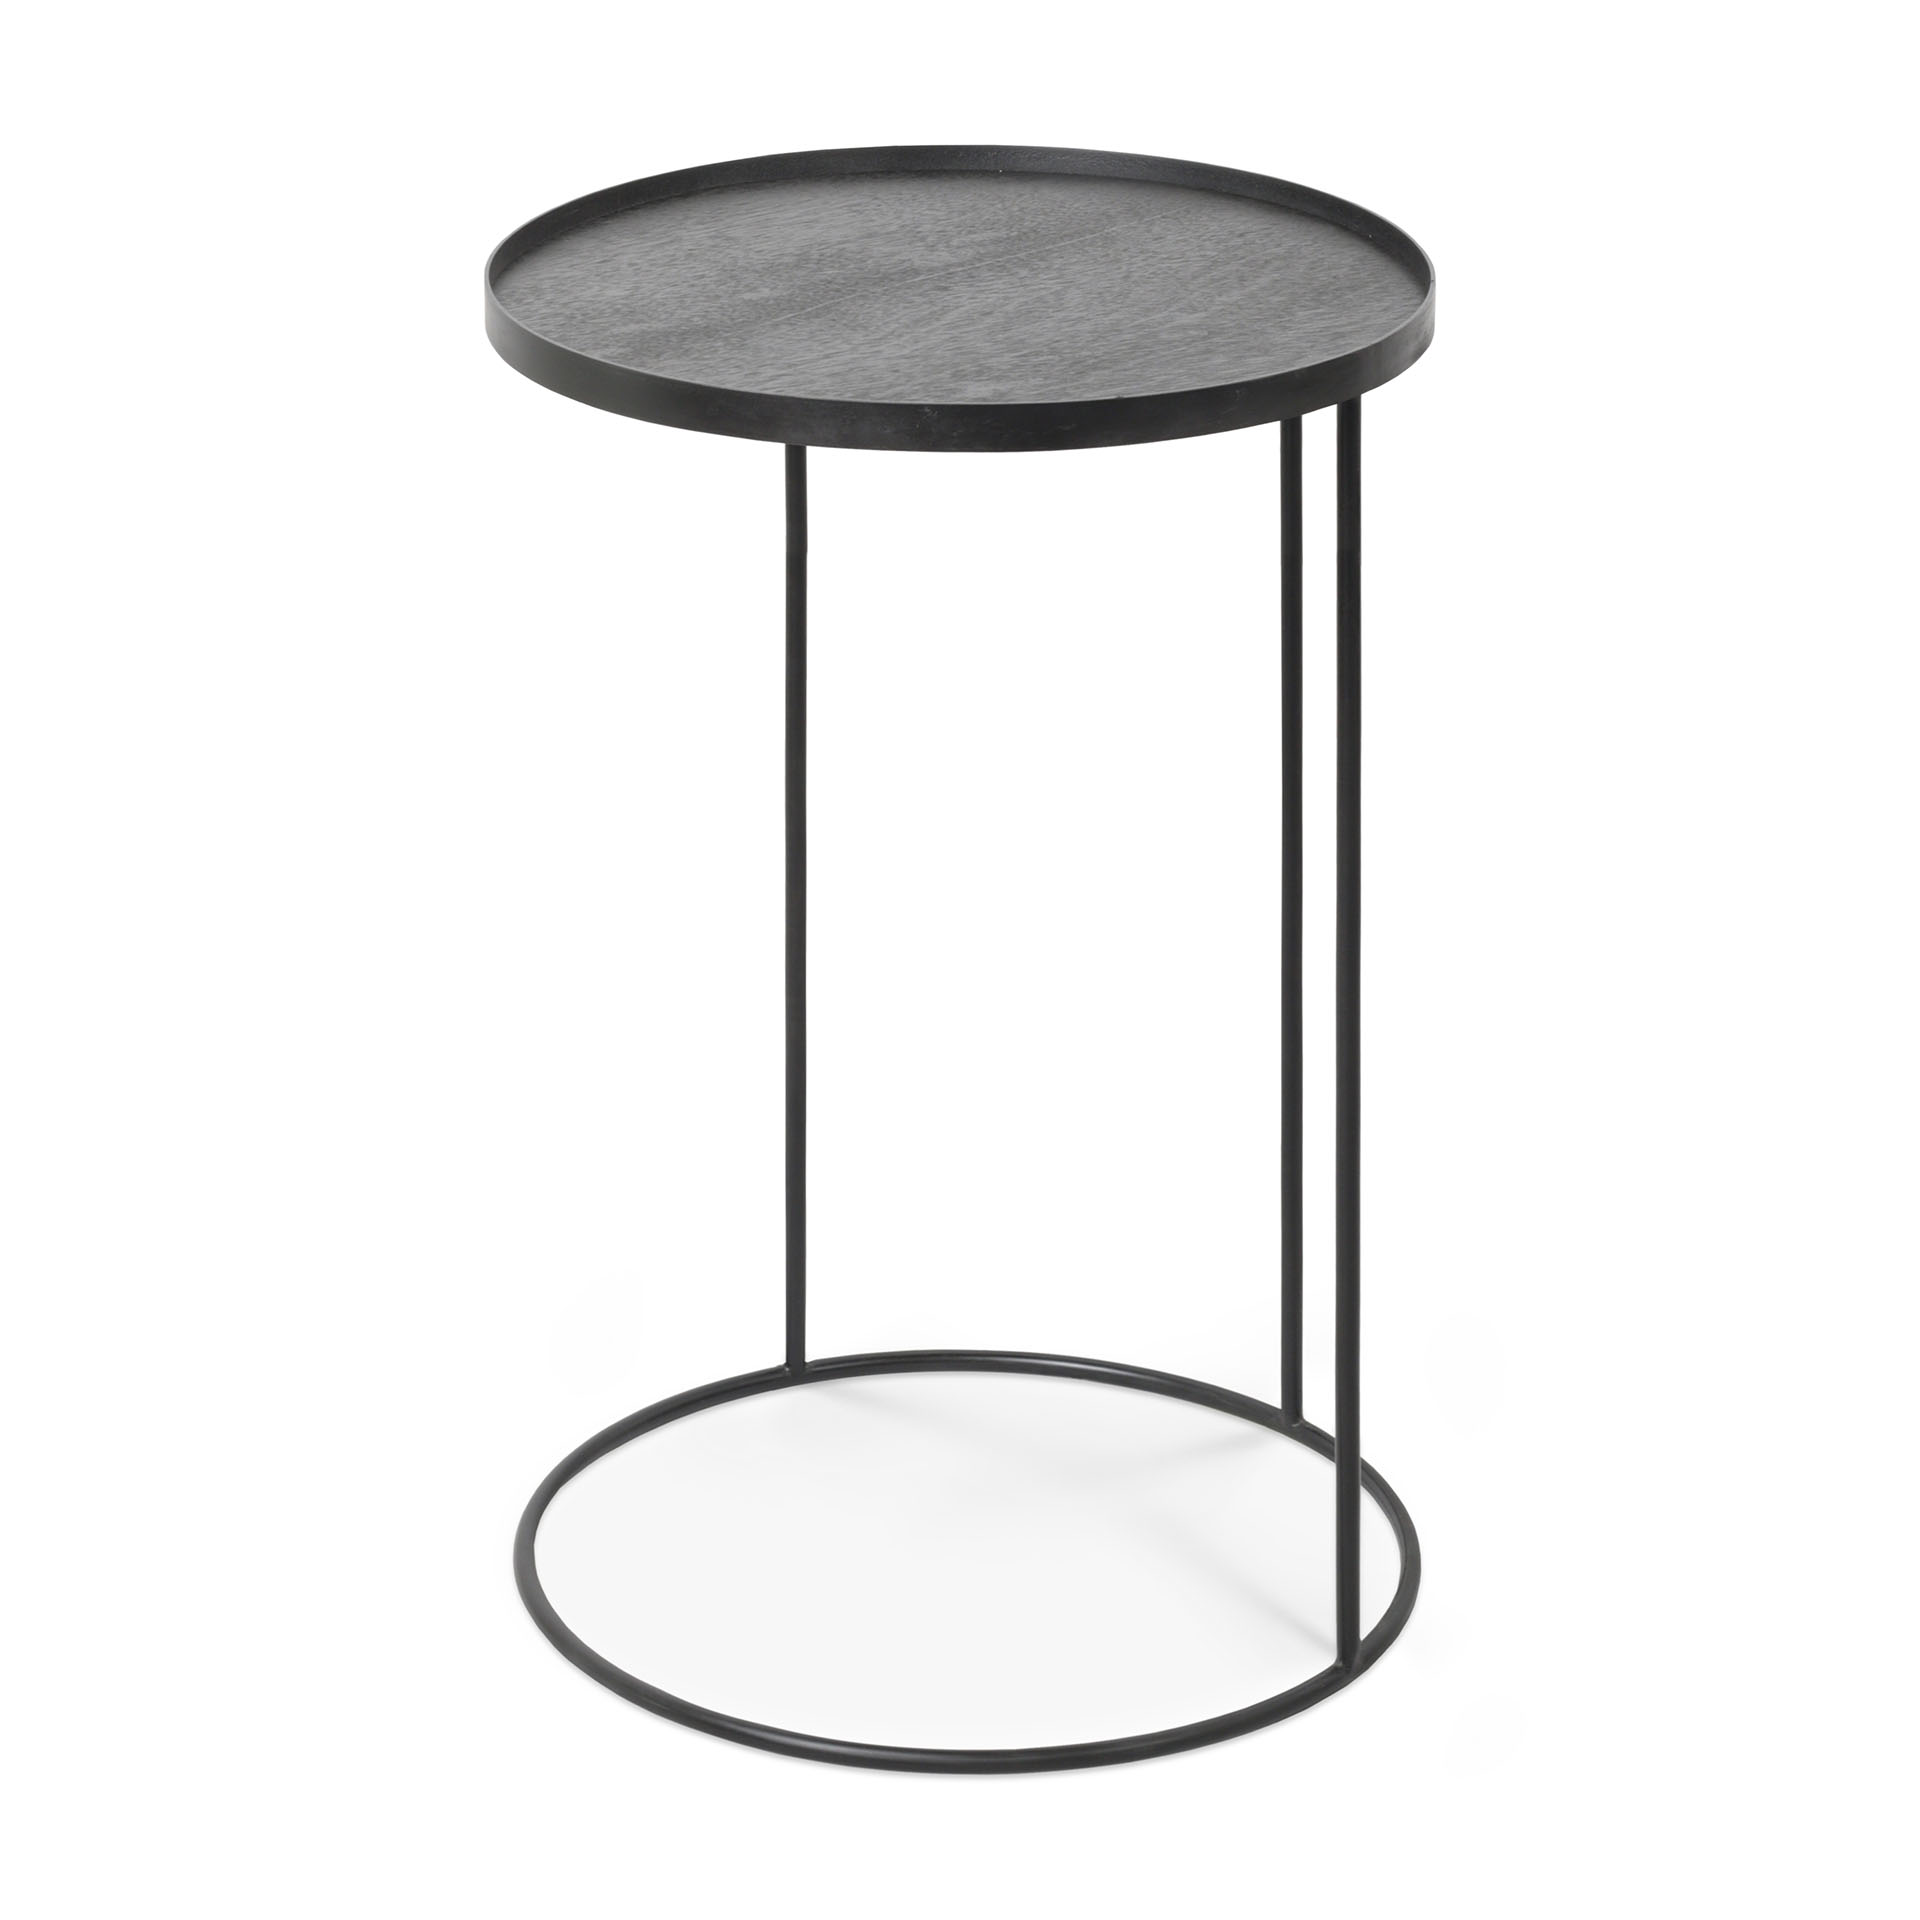 20704_Round_tray_side_table_S_front_cut_web